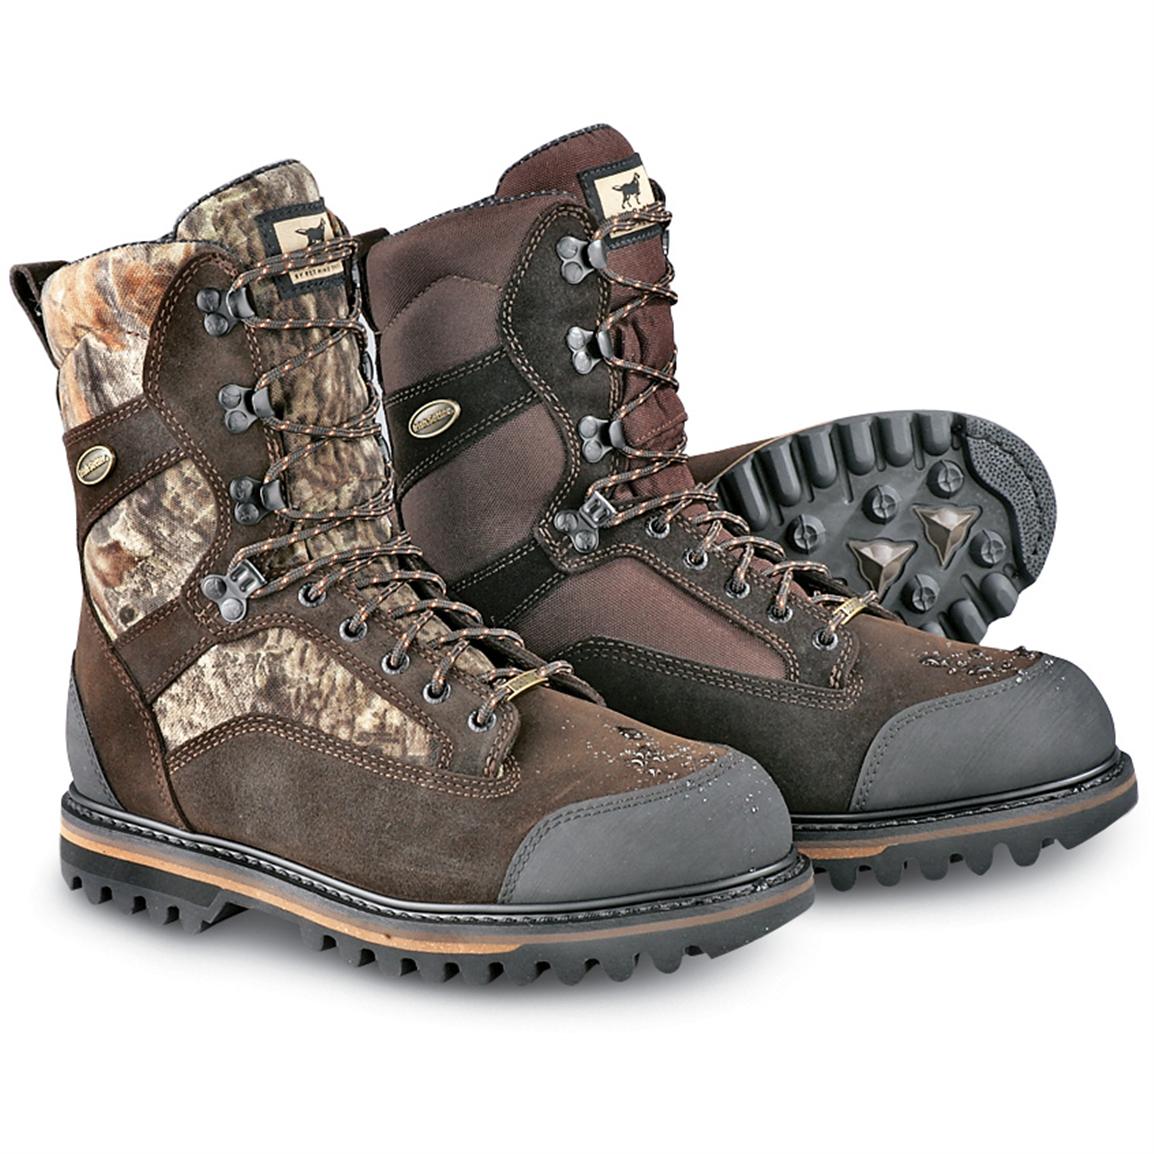 gore tex insulated boots